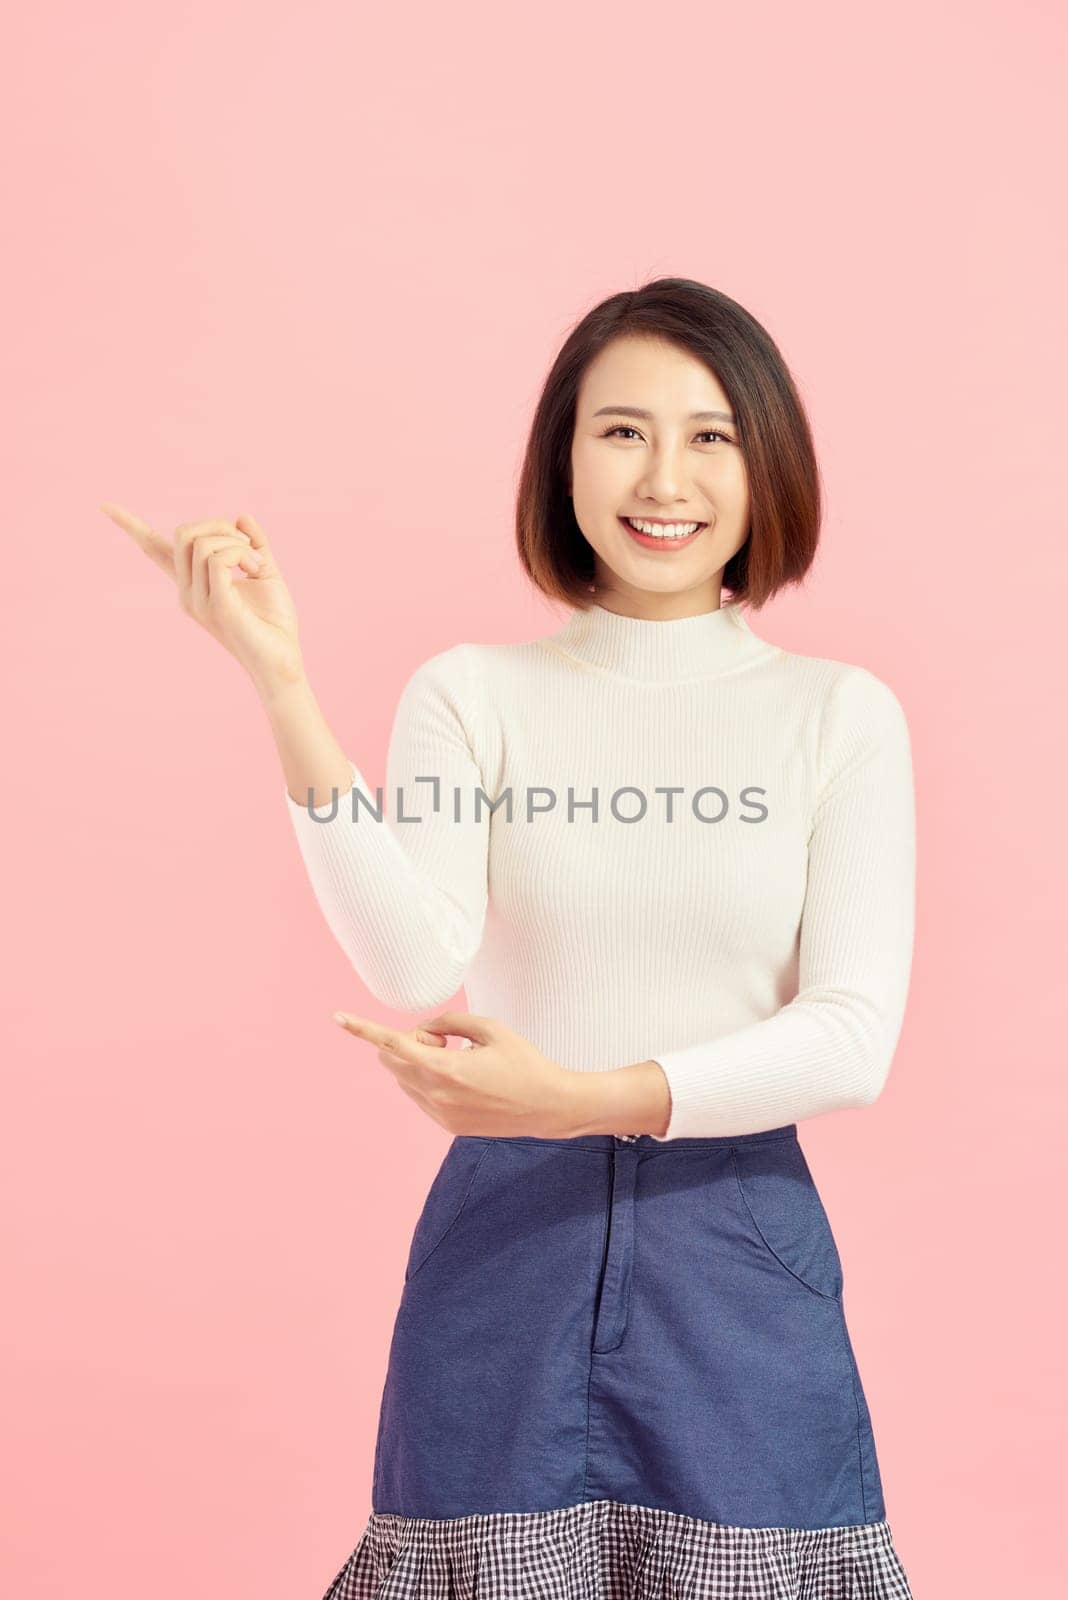 Businesswoman pressing button or something. Isolated on pink background by makidotvn